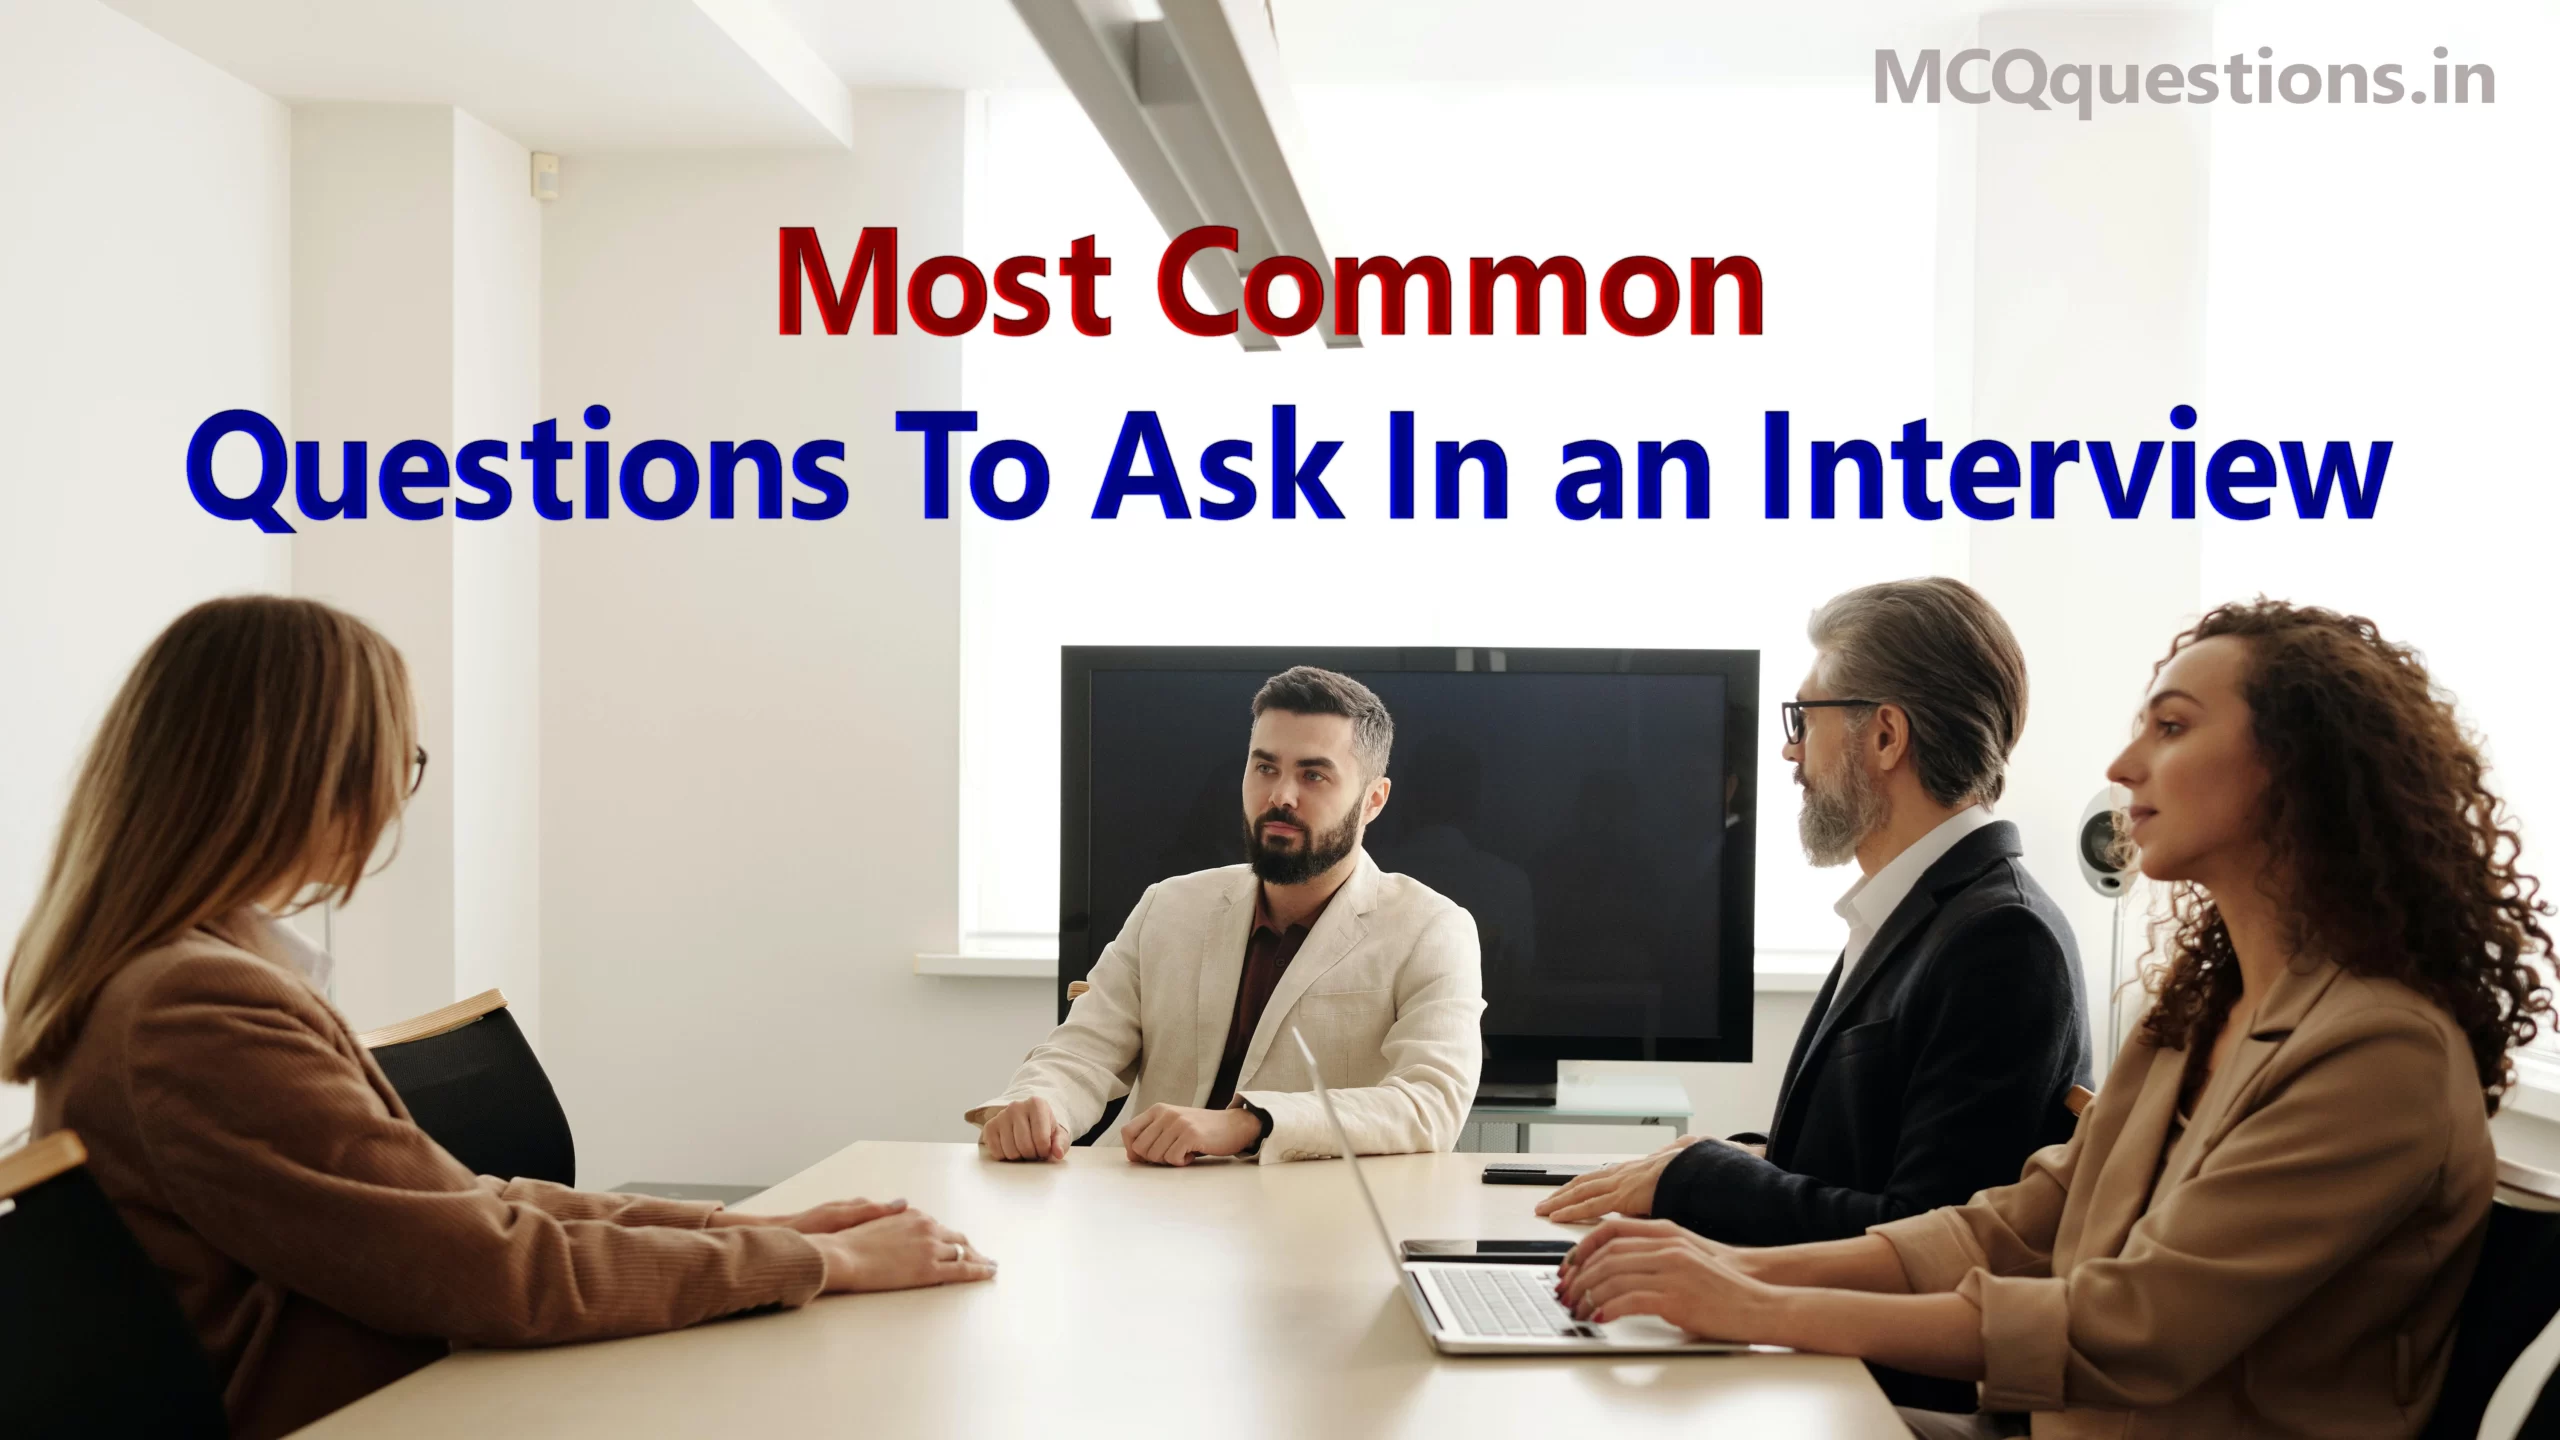 Questions To Ask In an Interview